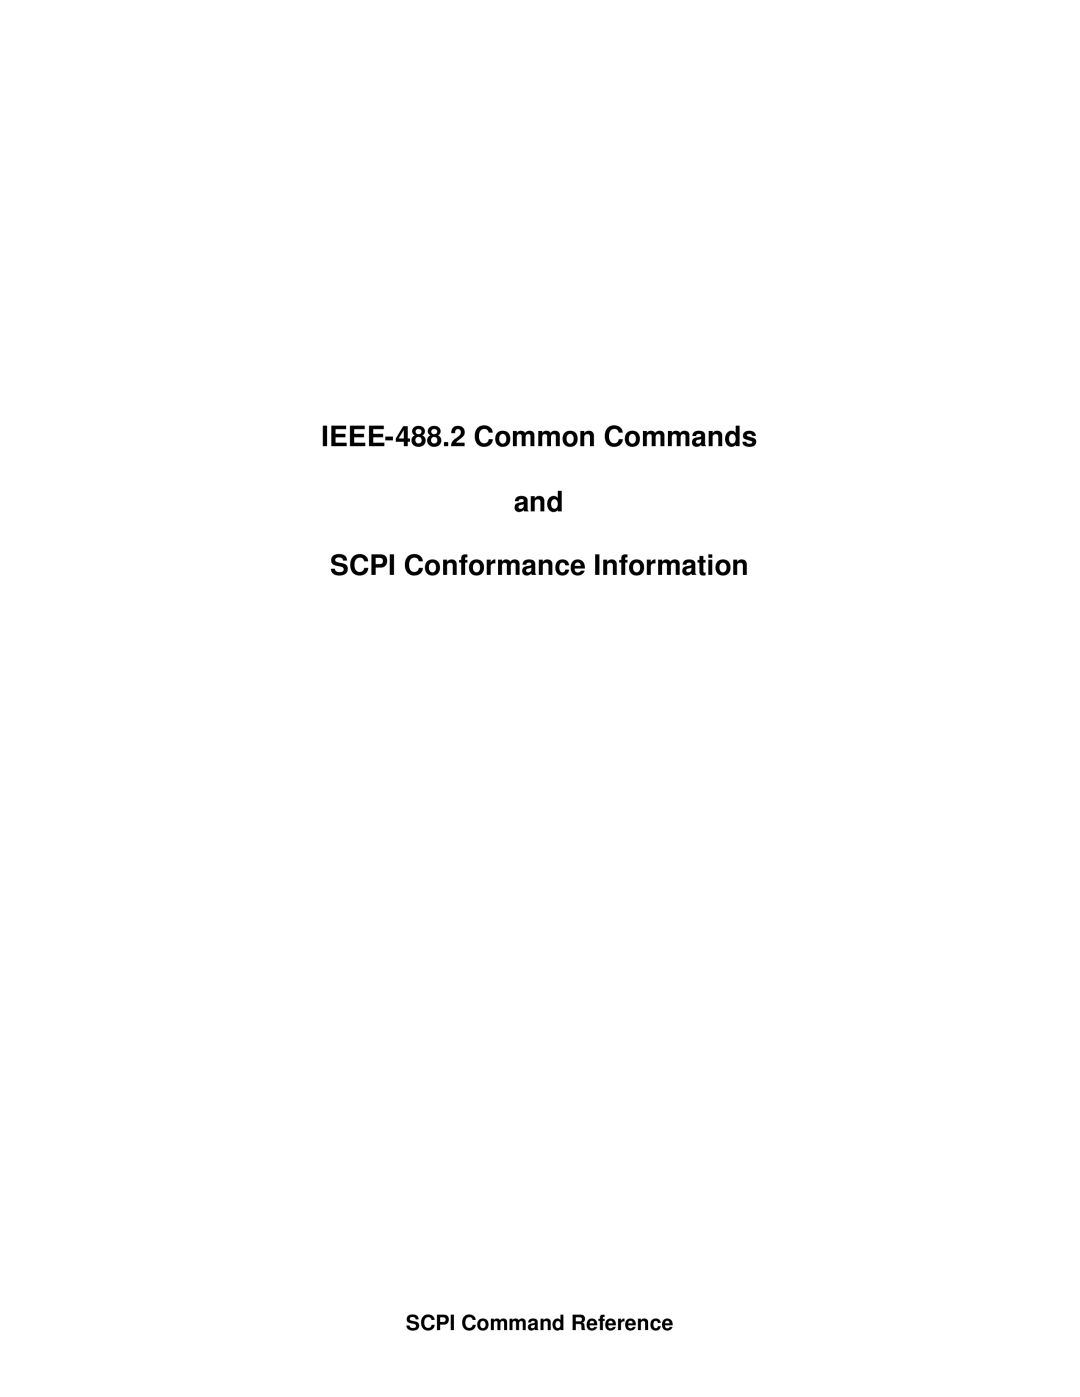 Agilent Technologies E1446A user manual IEEE-488.2 Common Commands Scpi Conformance Information 